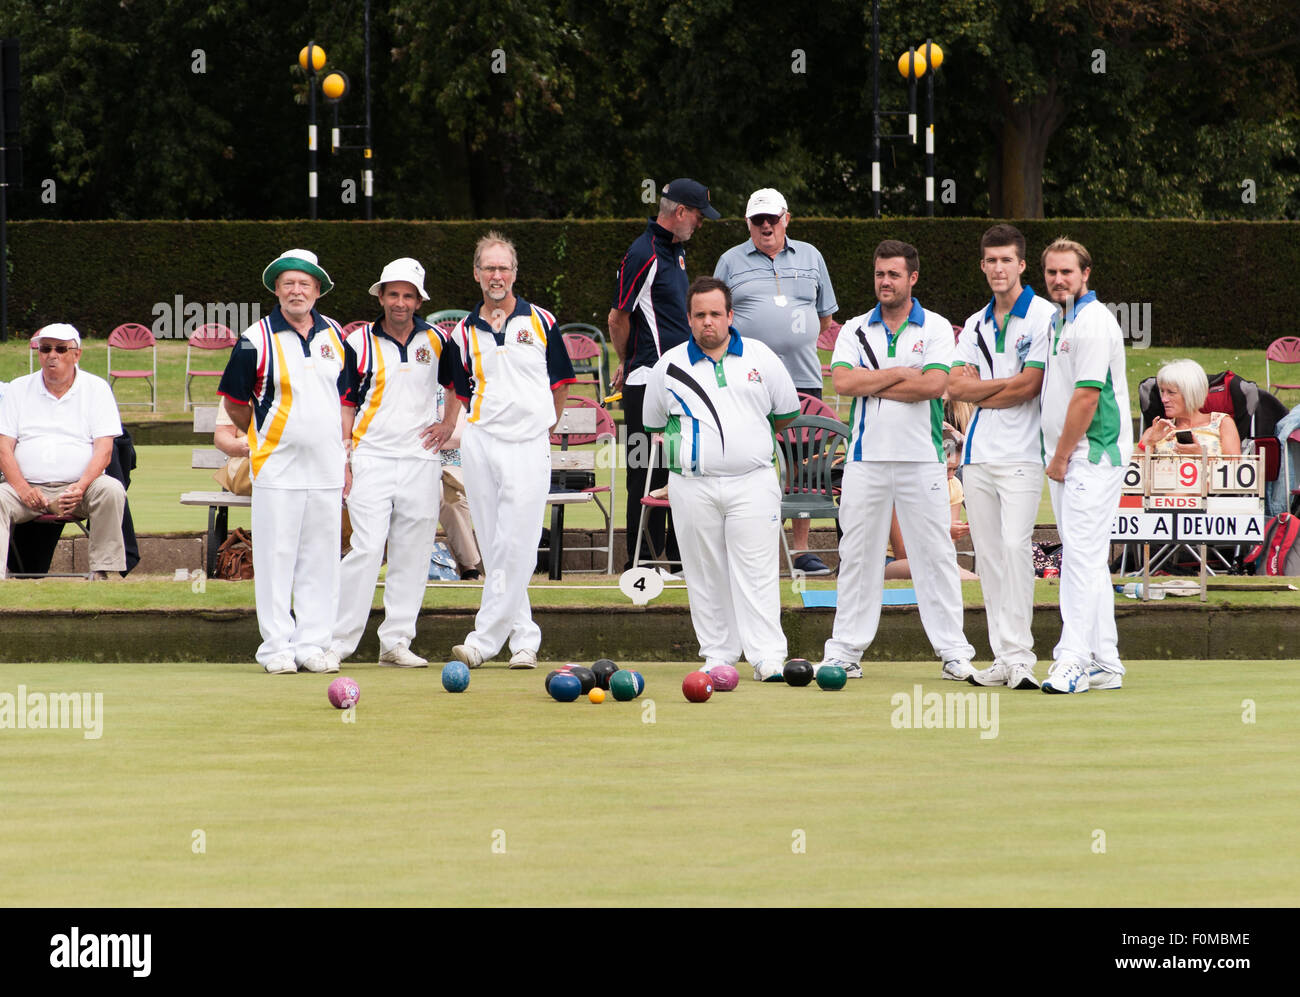 Two sides wait for the next bowl during a match in the National Bowls Championship. Stock Photo